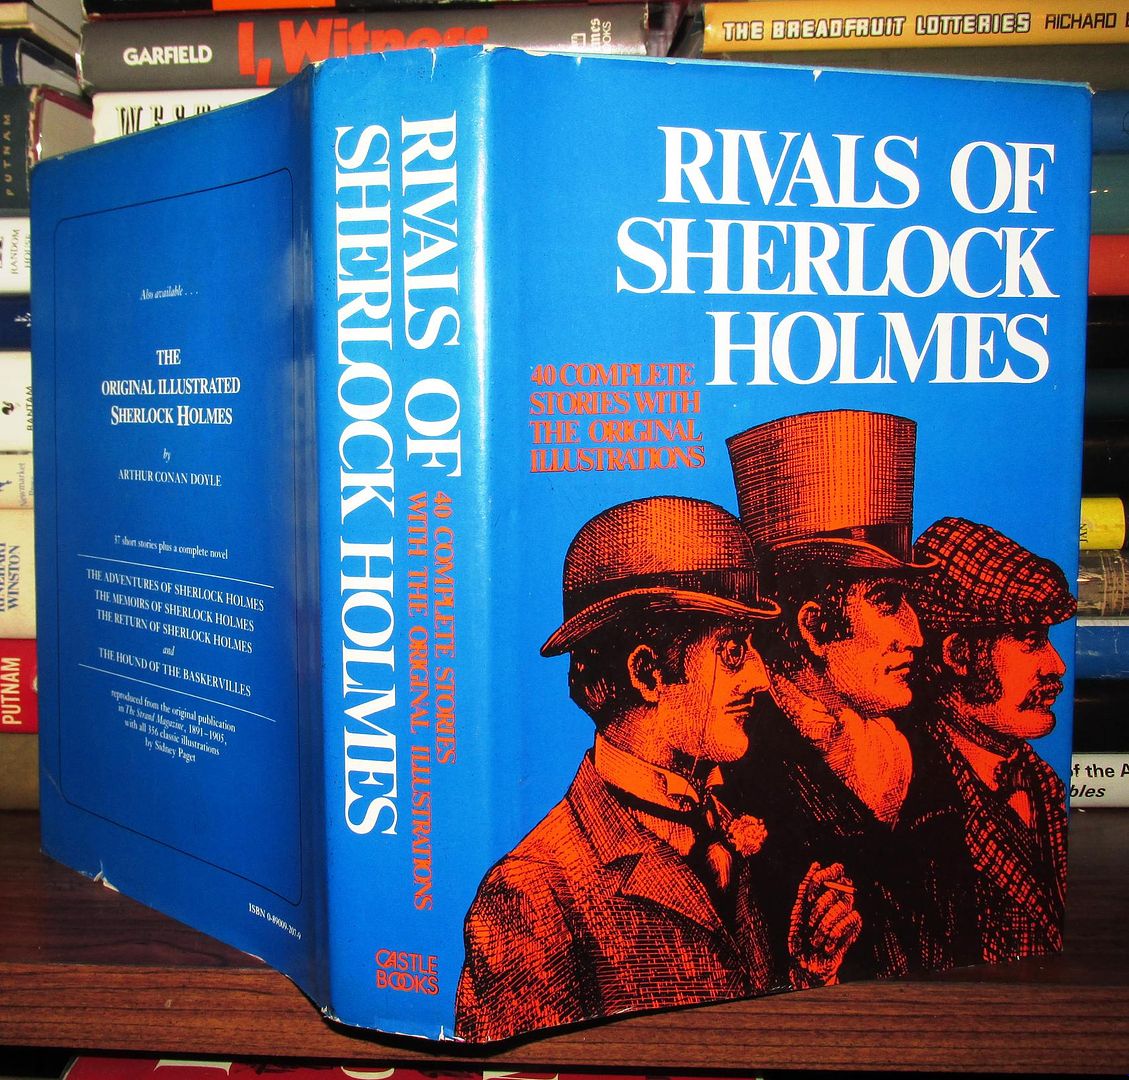 RUSSELL, ALAN K. - Rivals of Sherlock Holmes Forty Stories of Crime and Detection from Original Illustrated Magazines